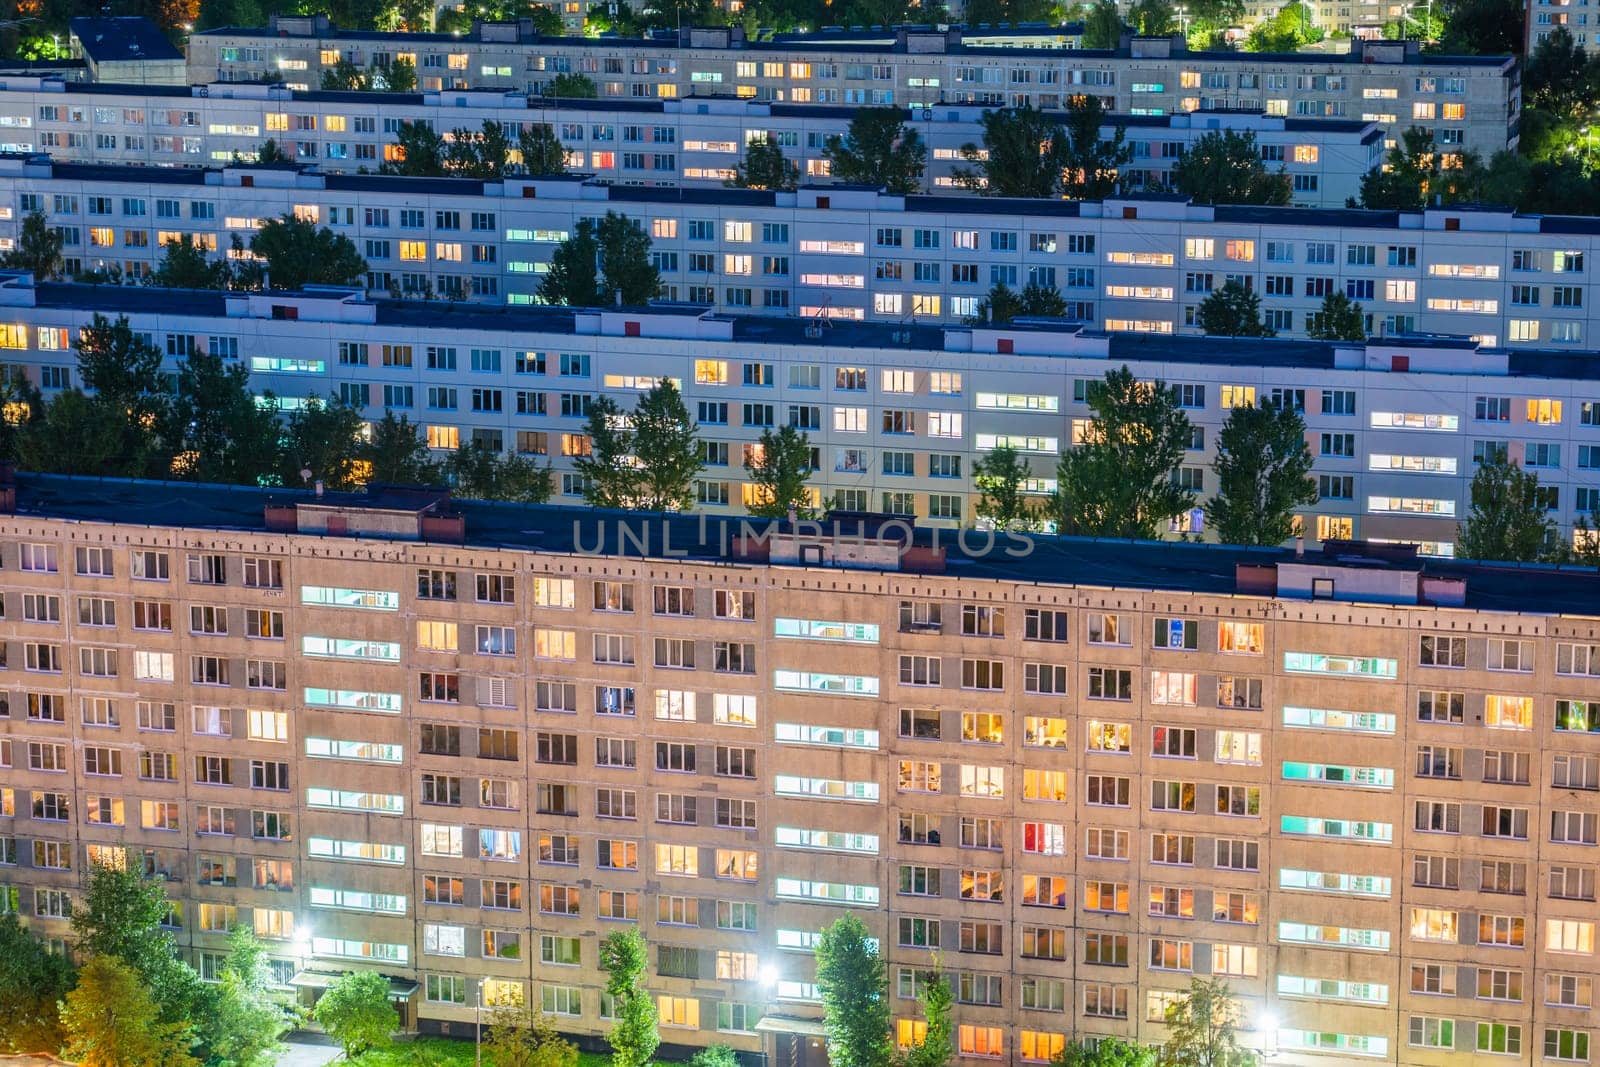 Timelapse of residential quarters of the night city with the lights on from the windows of the apartments